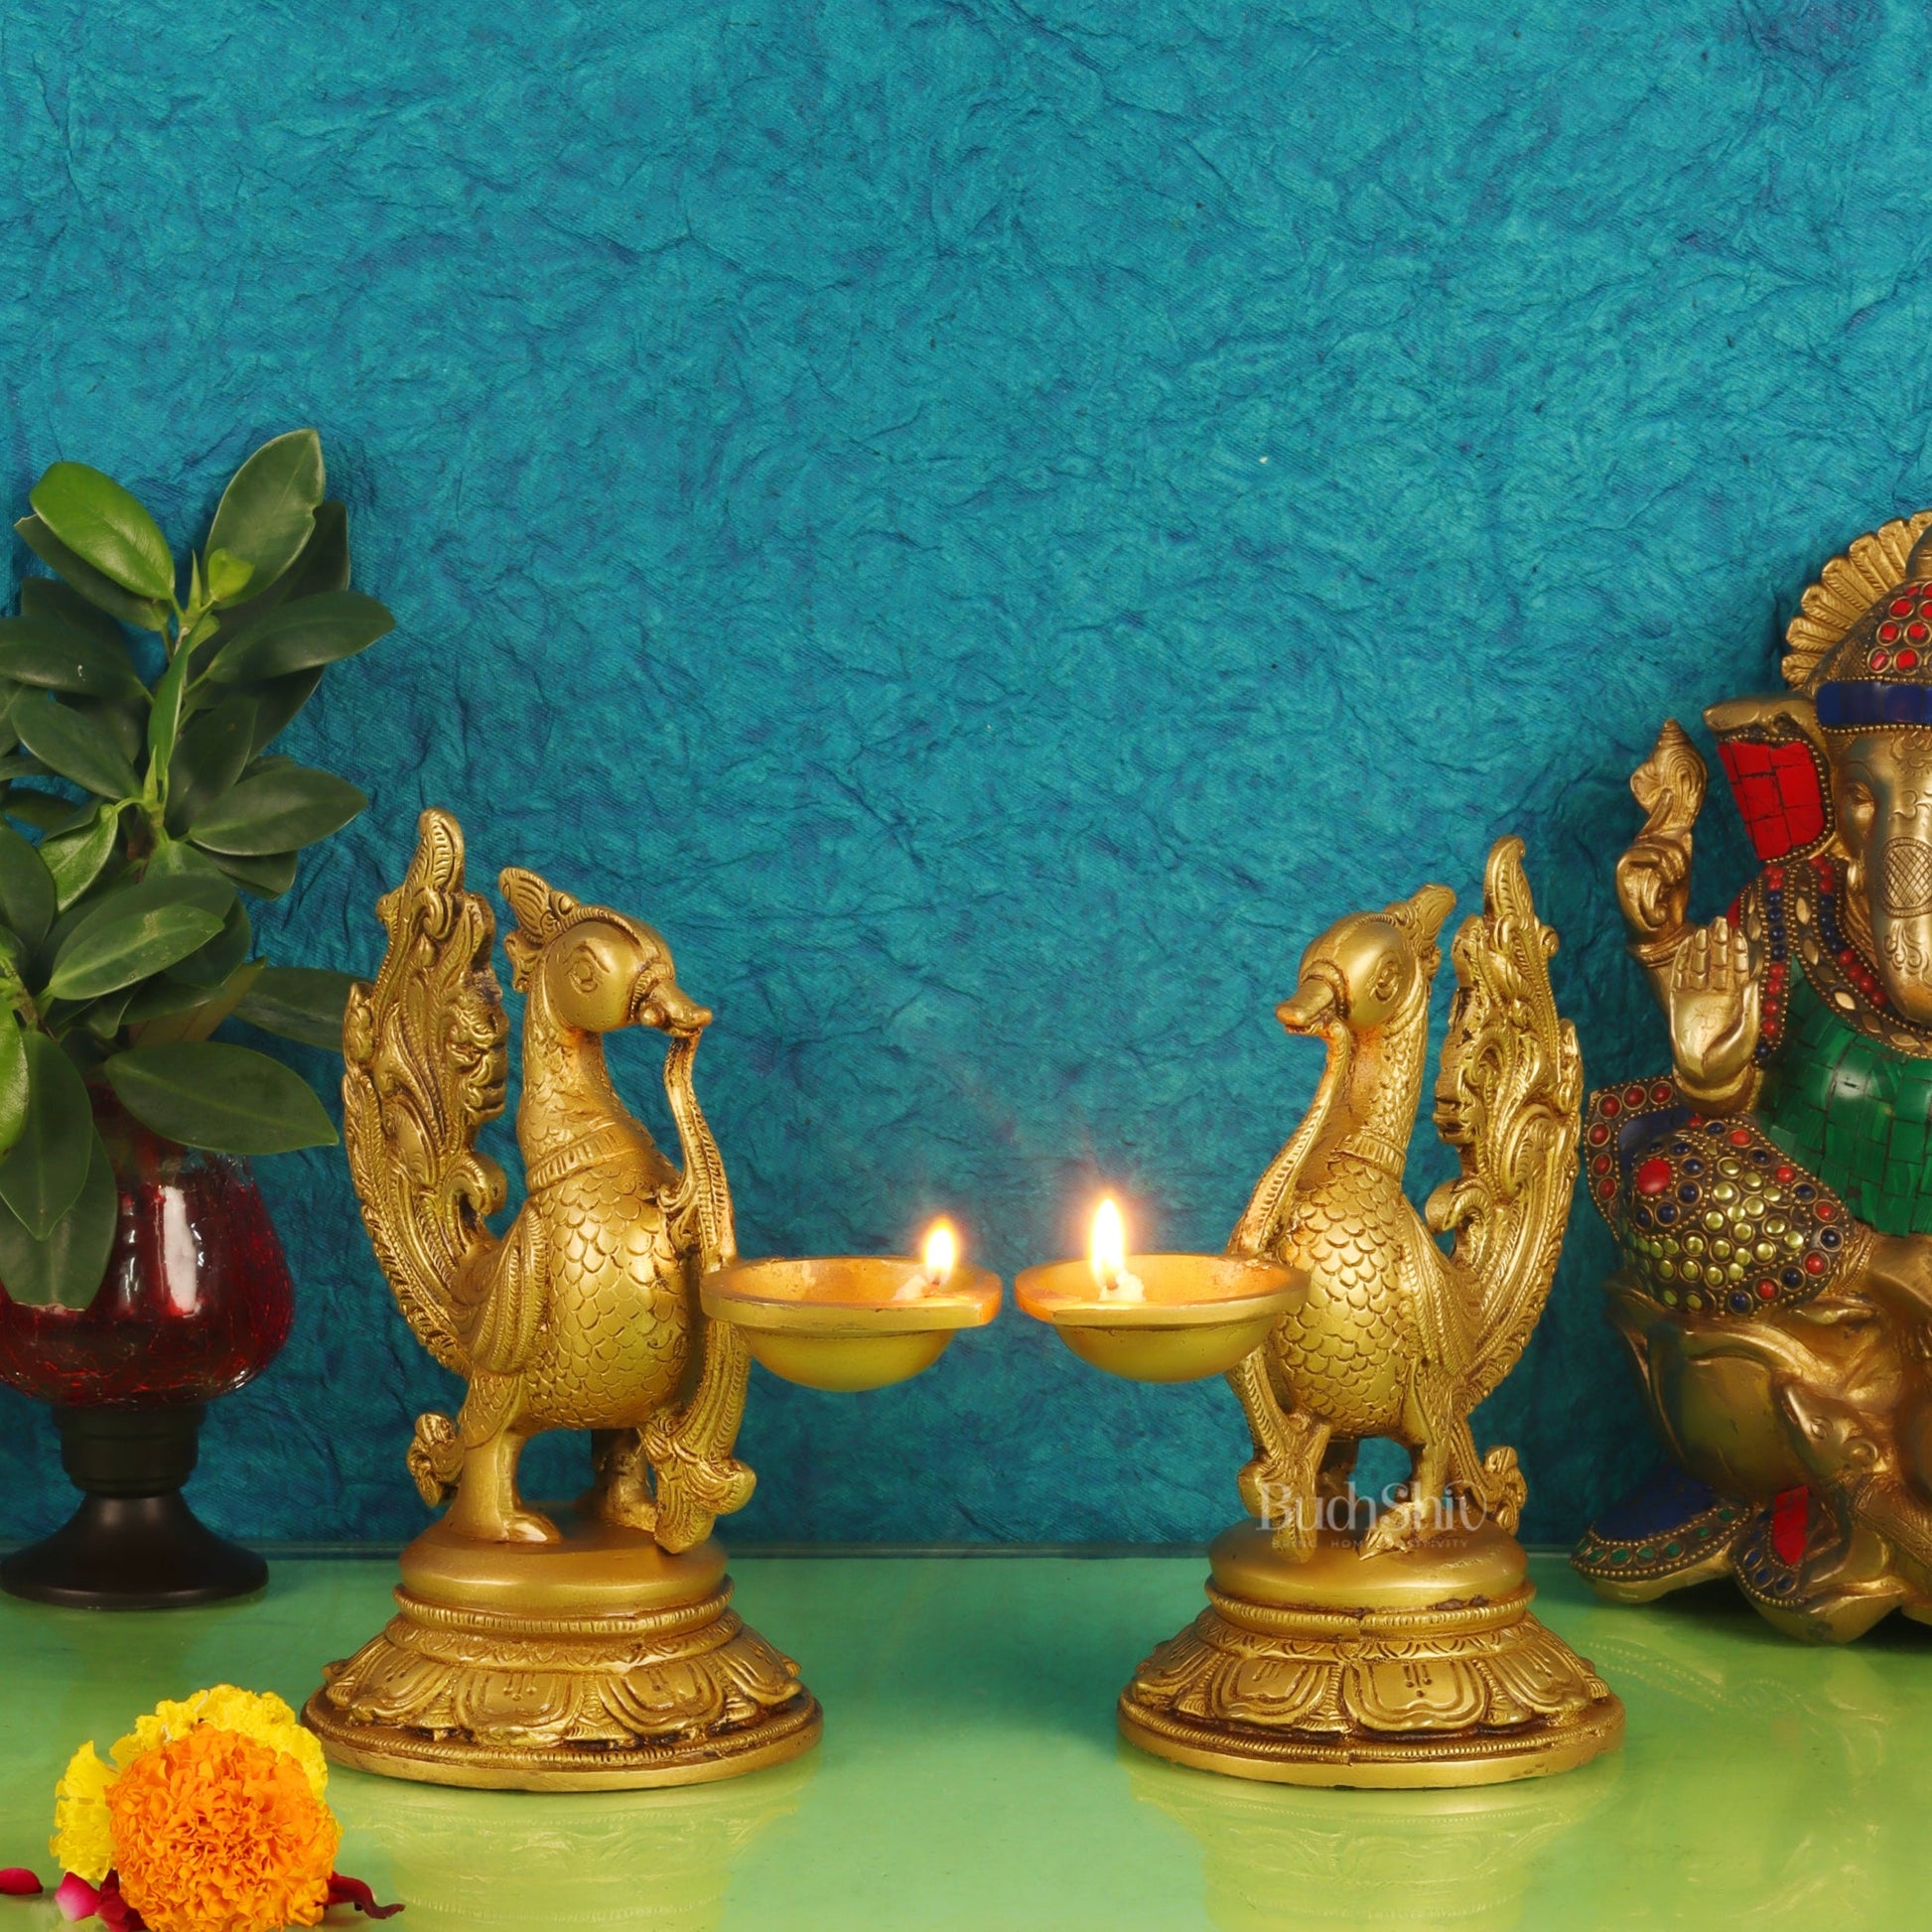 Pair of Handcrafted Brass Annam Diyas | Height 7.5 inches - Budhshiv.com